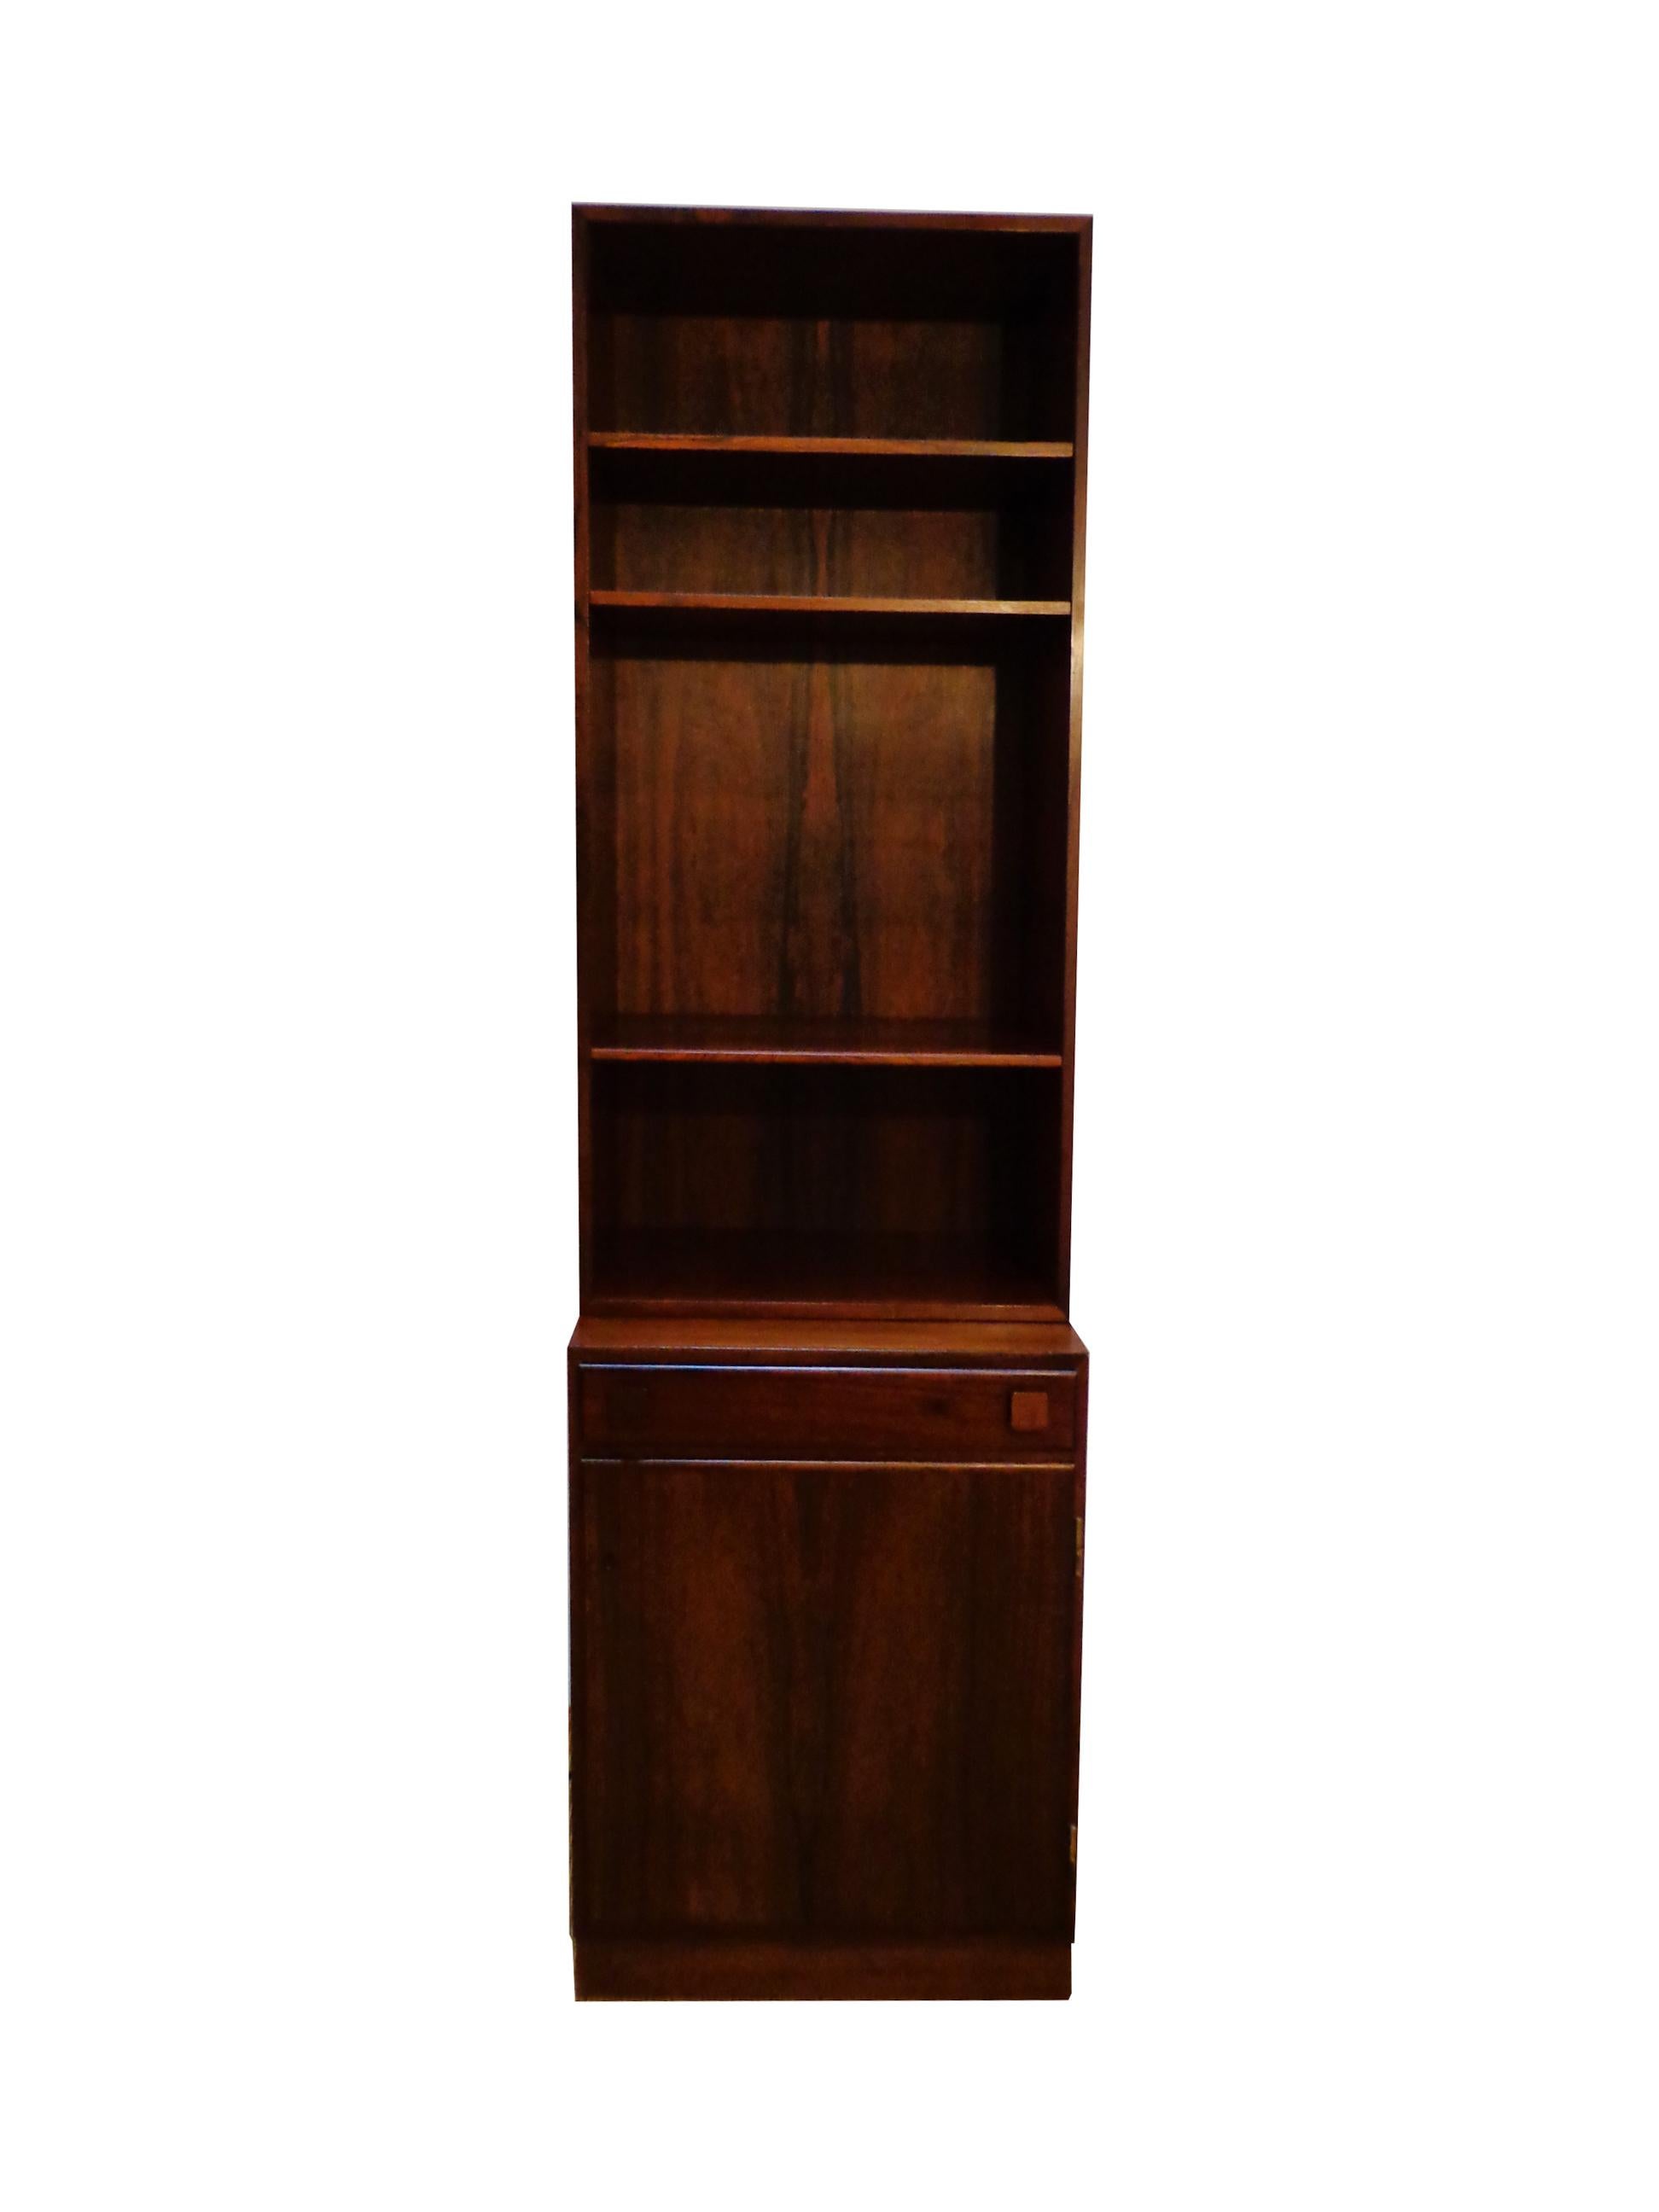 Wall cabinet of rosewood designed by Takashi Okamura and Erik Marquardsen, consisting base cabinet with door and shelves inside. Original key included.
Manufactured by O. Bank Larsen Møbelfabrik. Signed with paper makers plaquette.